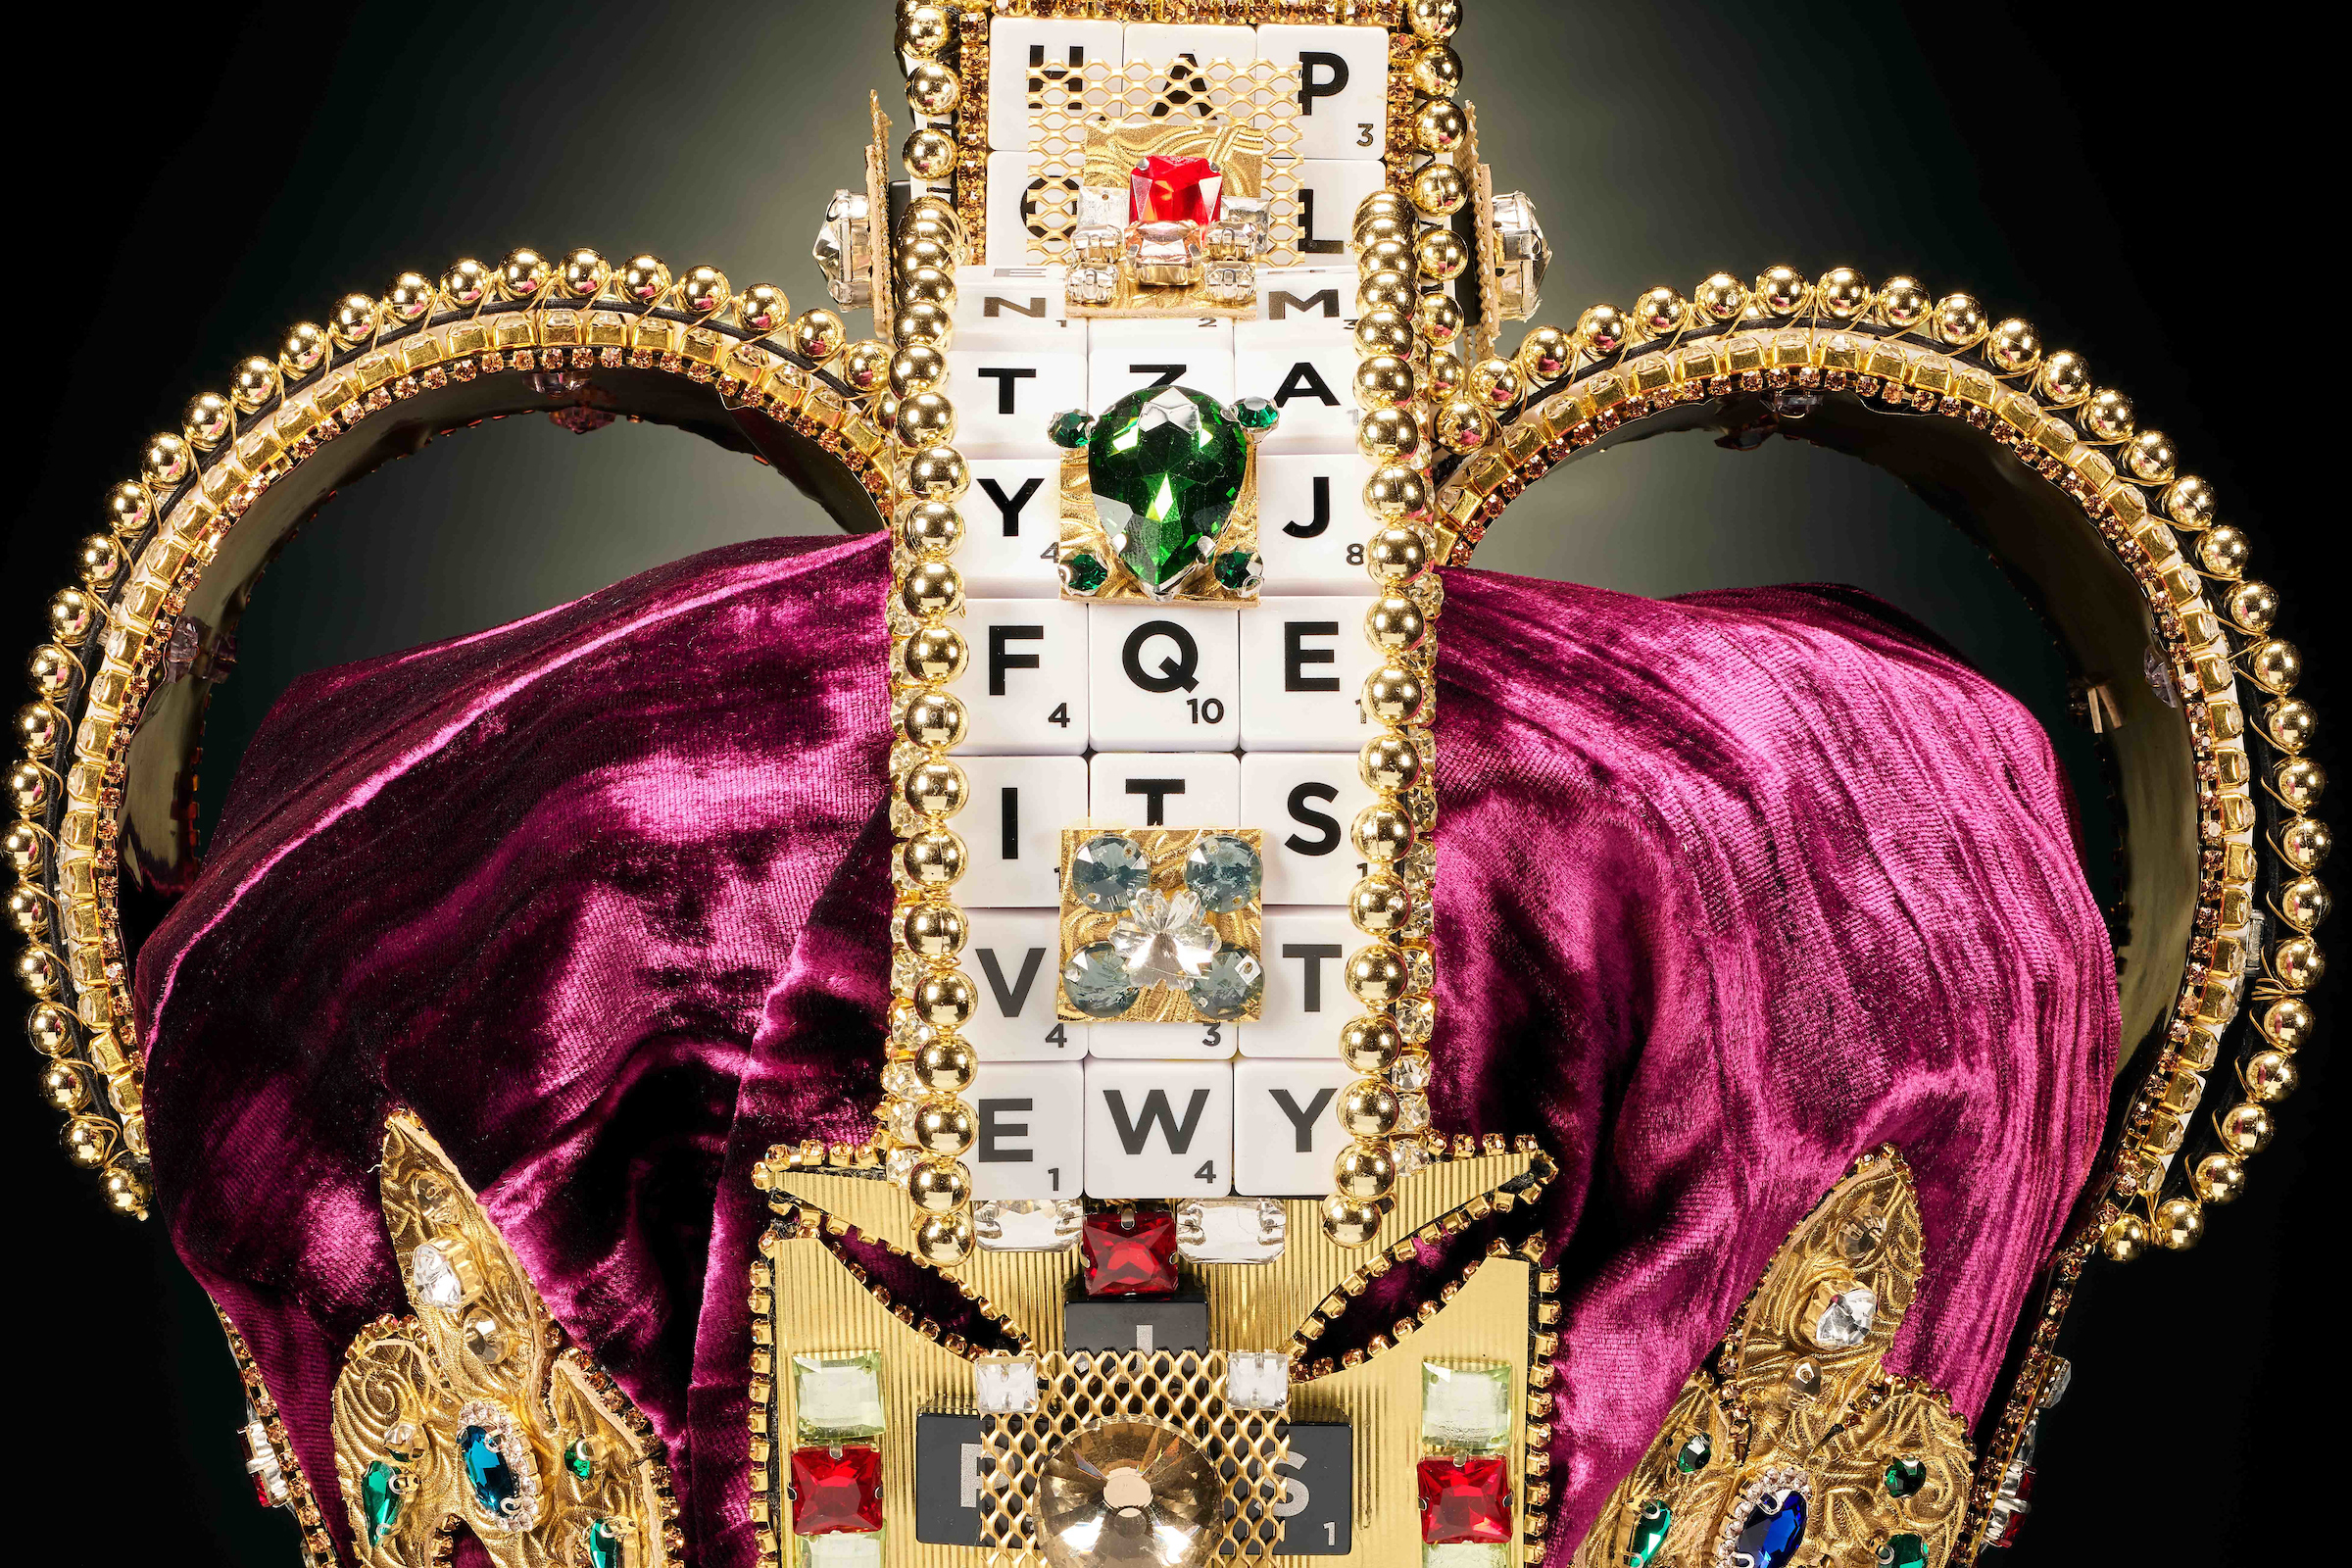 Top of a crown, which has Scrabble pieces and jewels on it 